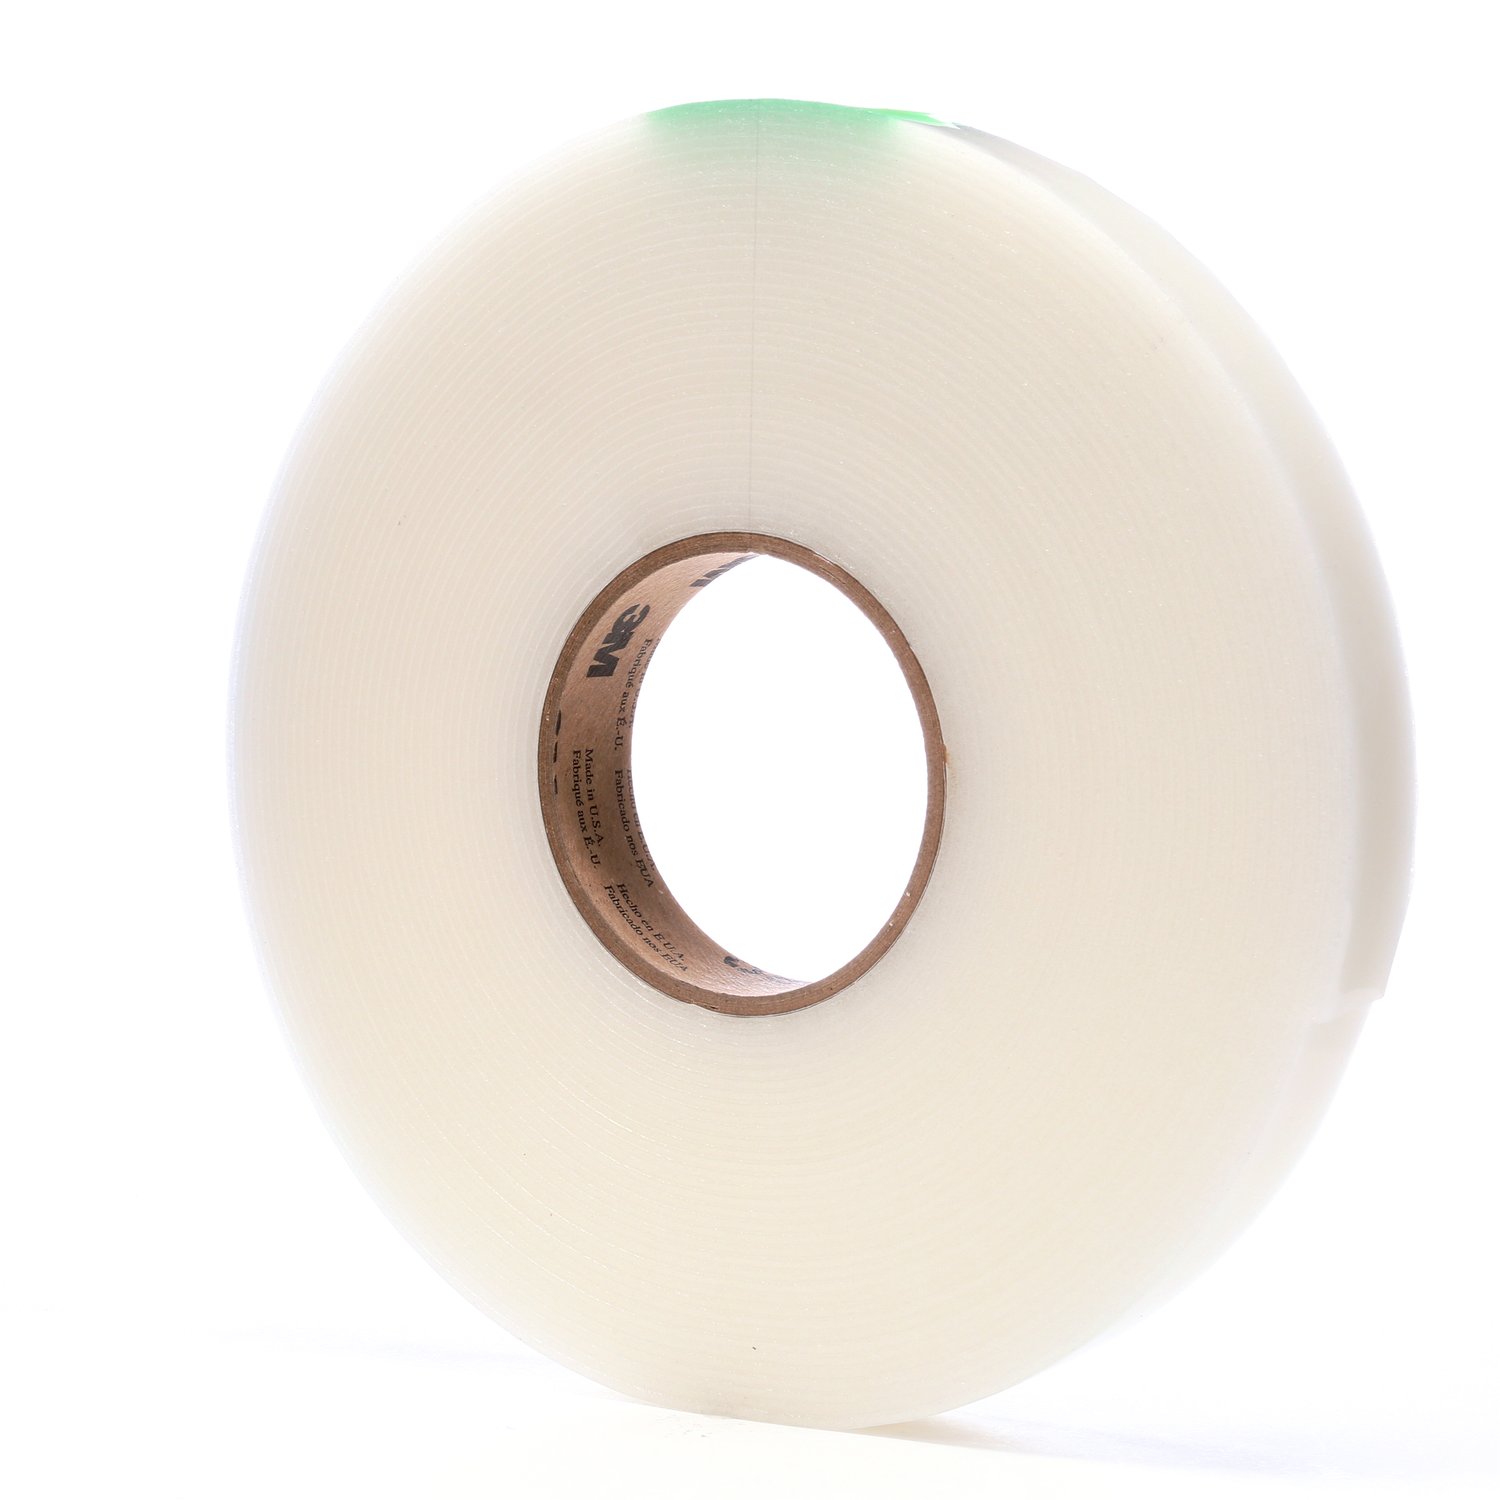 7100012972 - 3M Extreme Sealing Tape 4412N, Translucent, 80 mil, Roll, Config